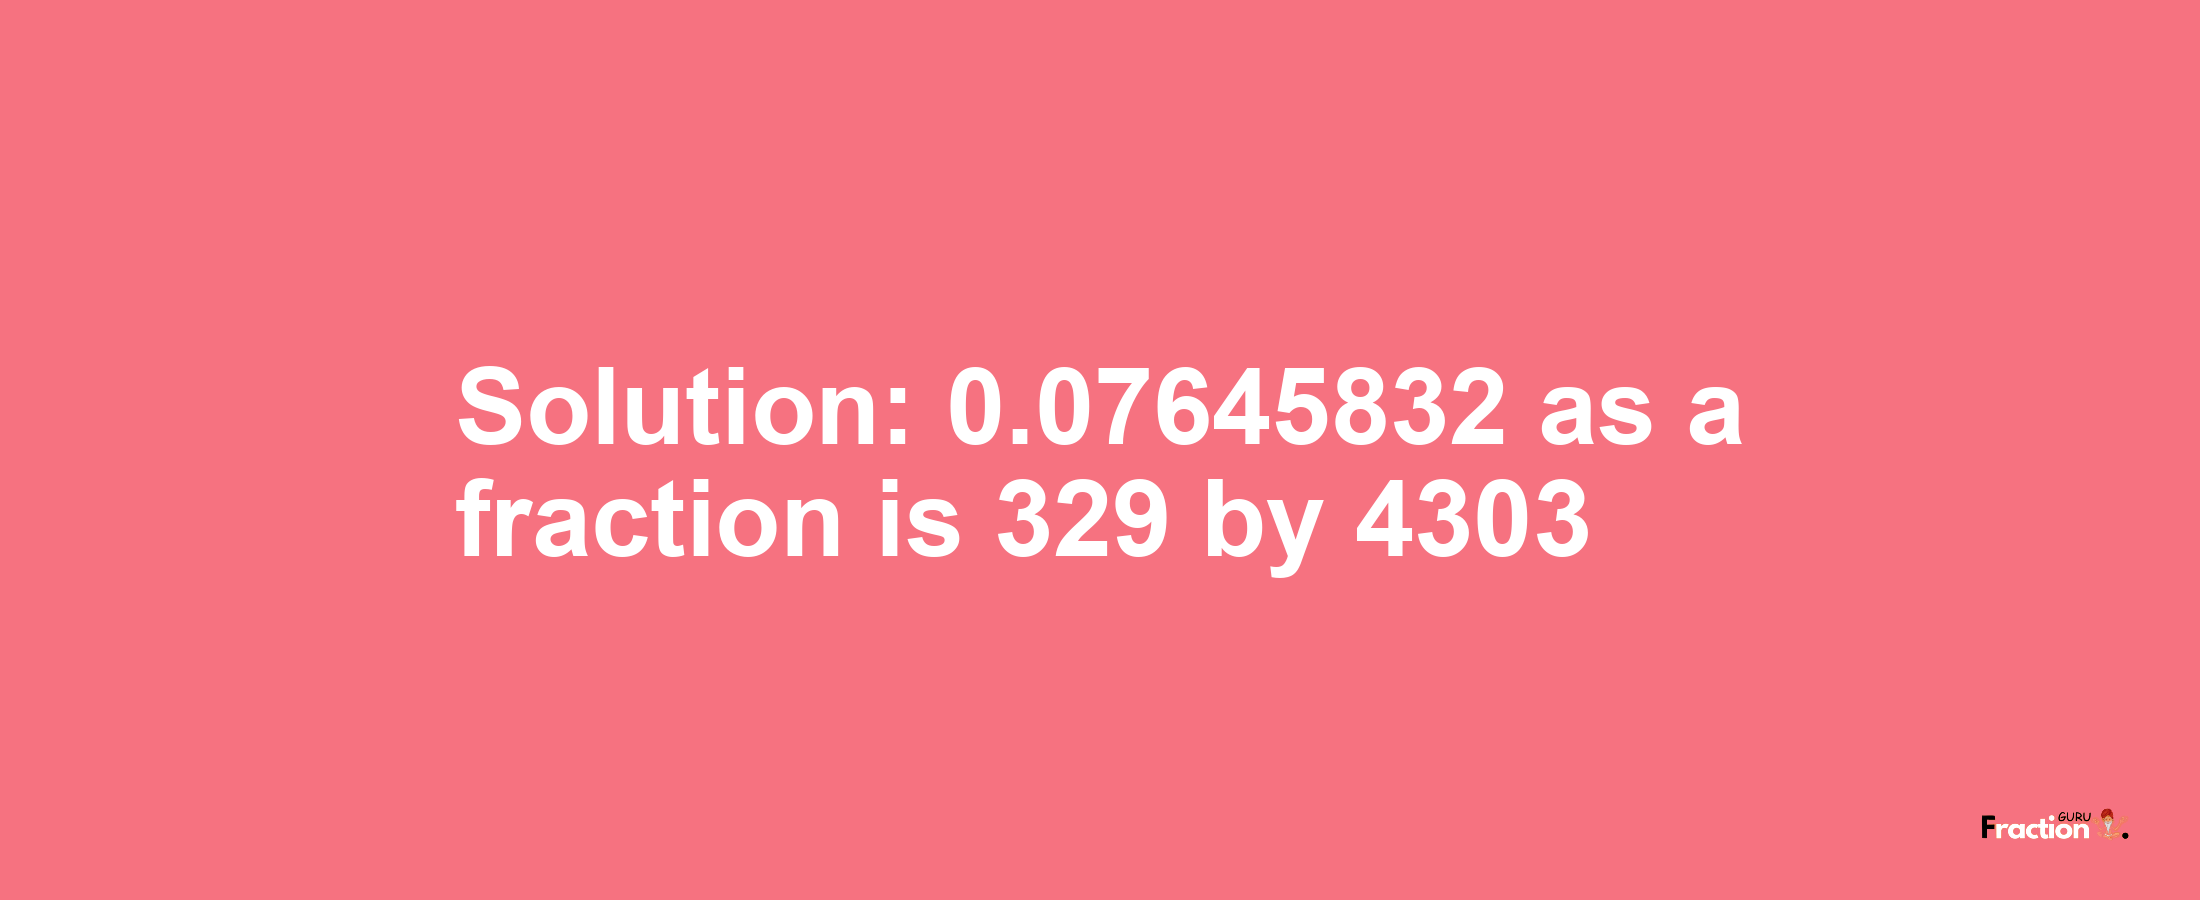 Solution:0.07645832 as a fraction is 329/4303